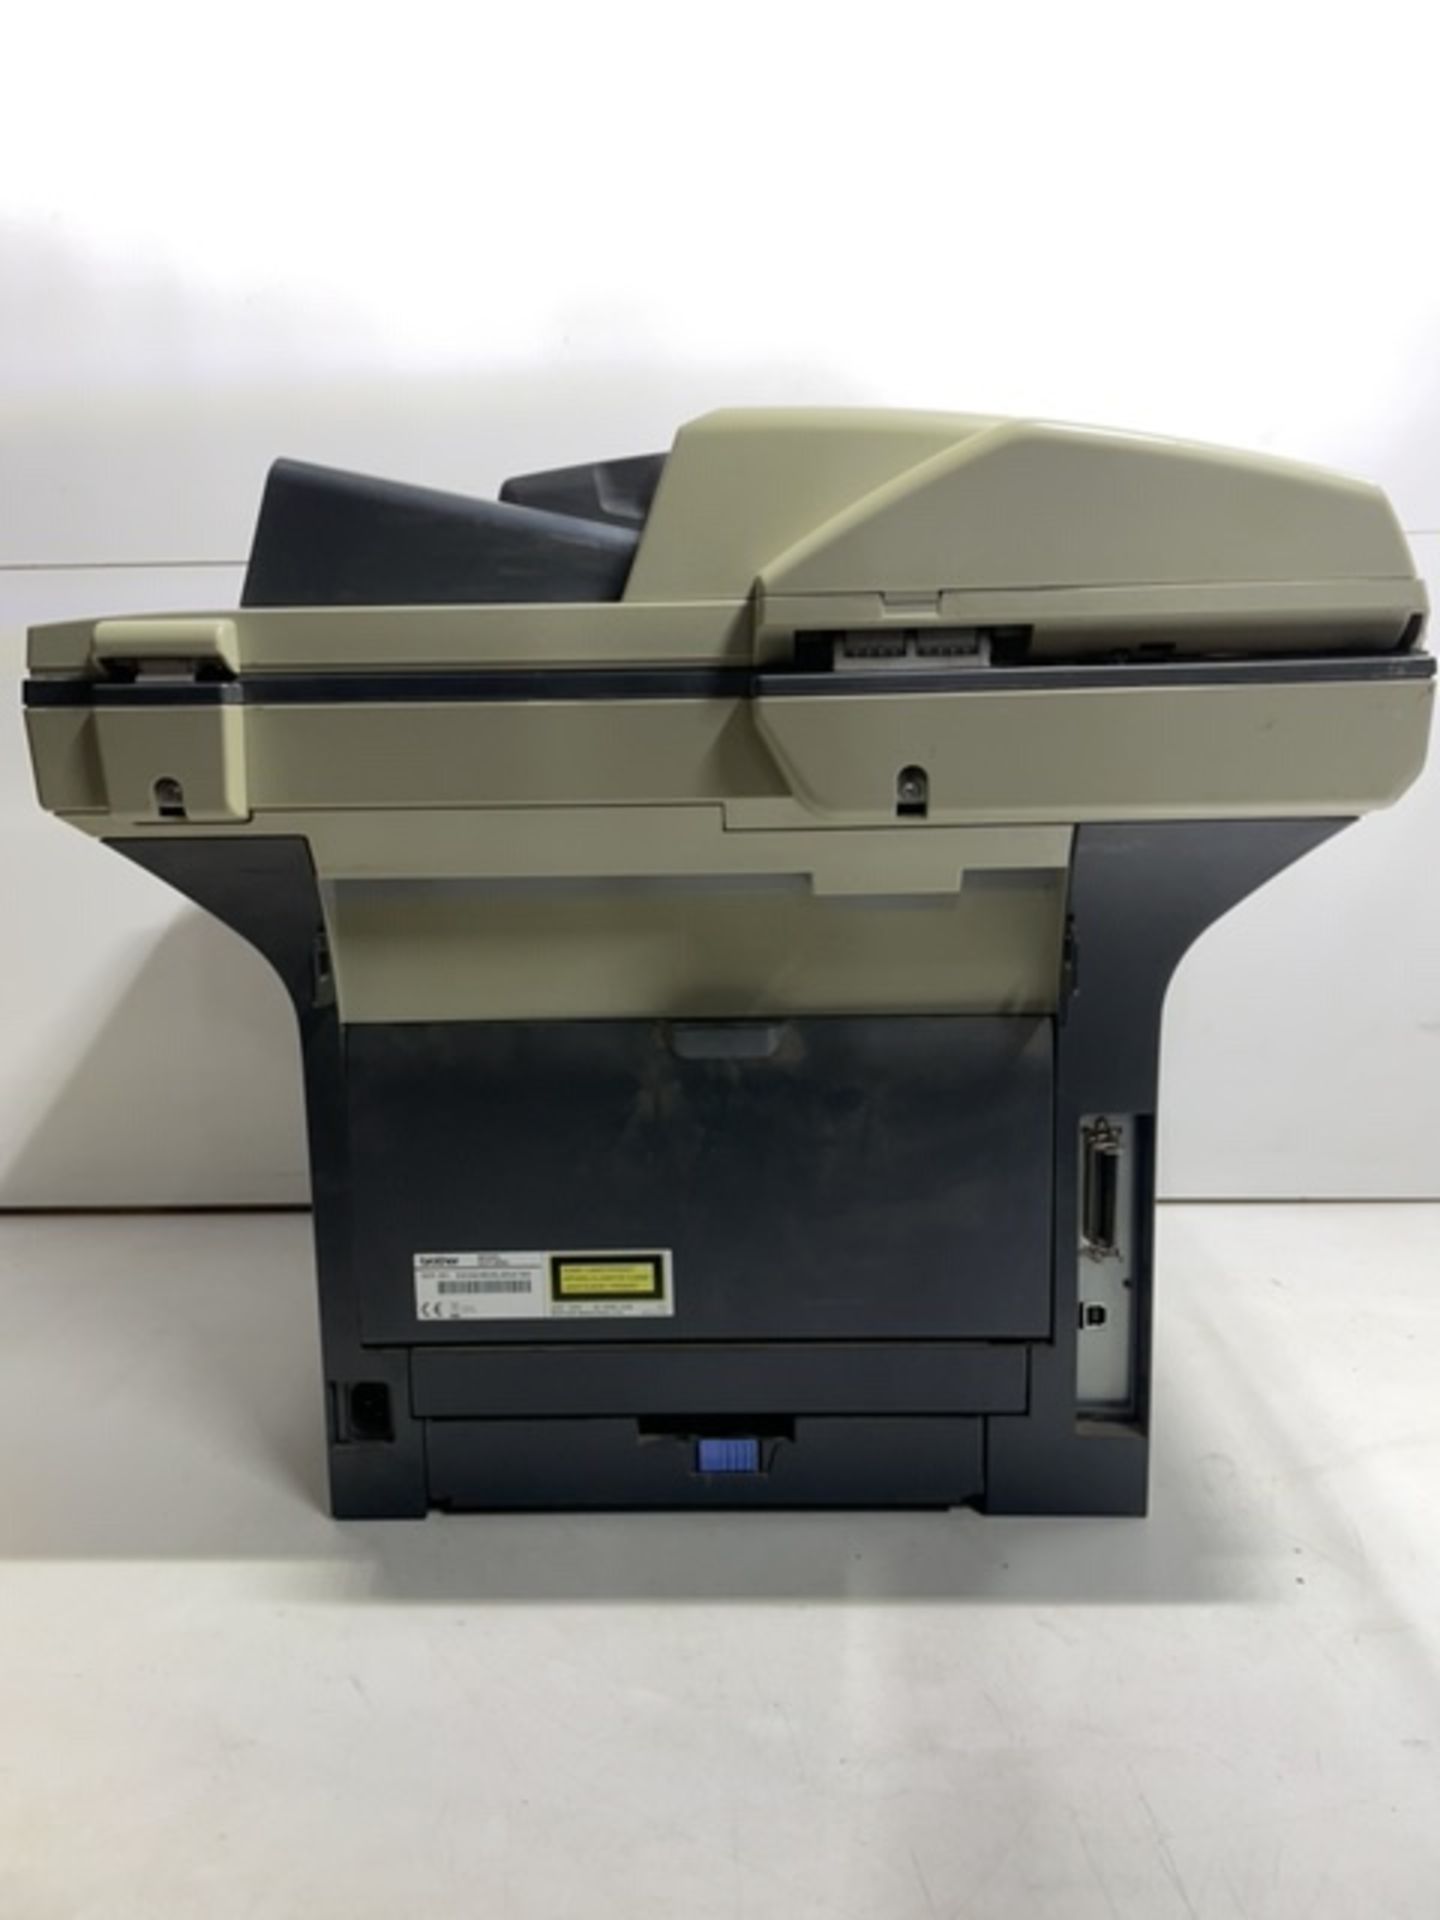 Brother DCP-8060 Multifunction Printer - Image 4 of 5